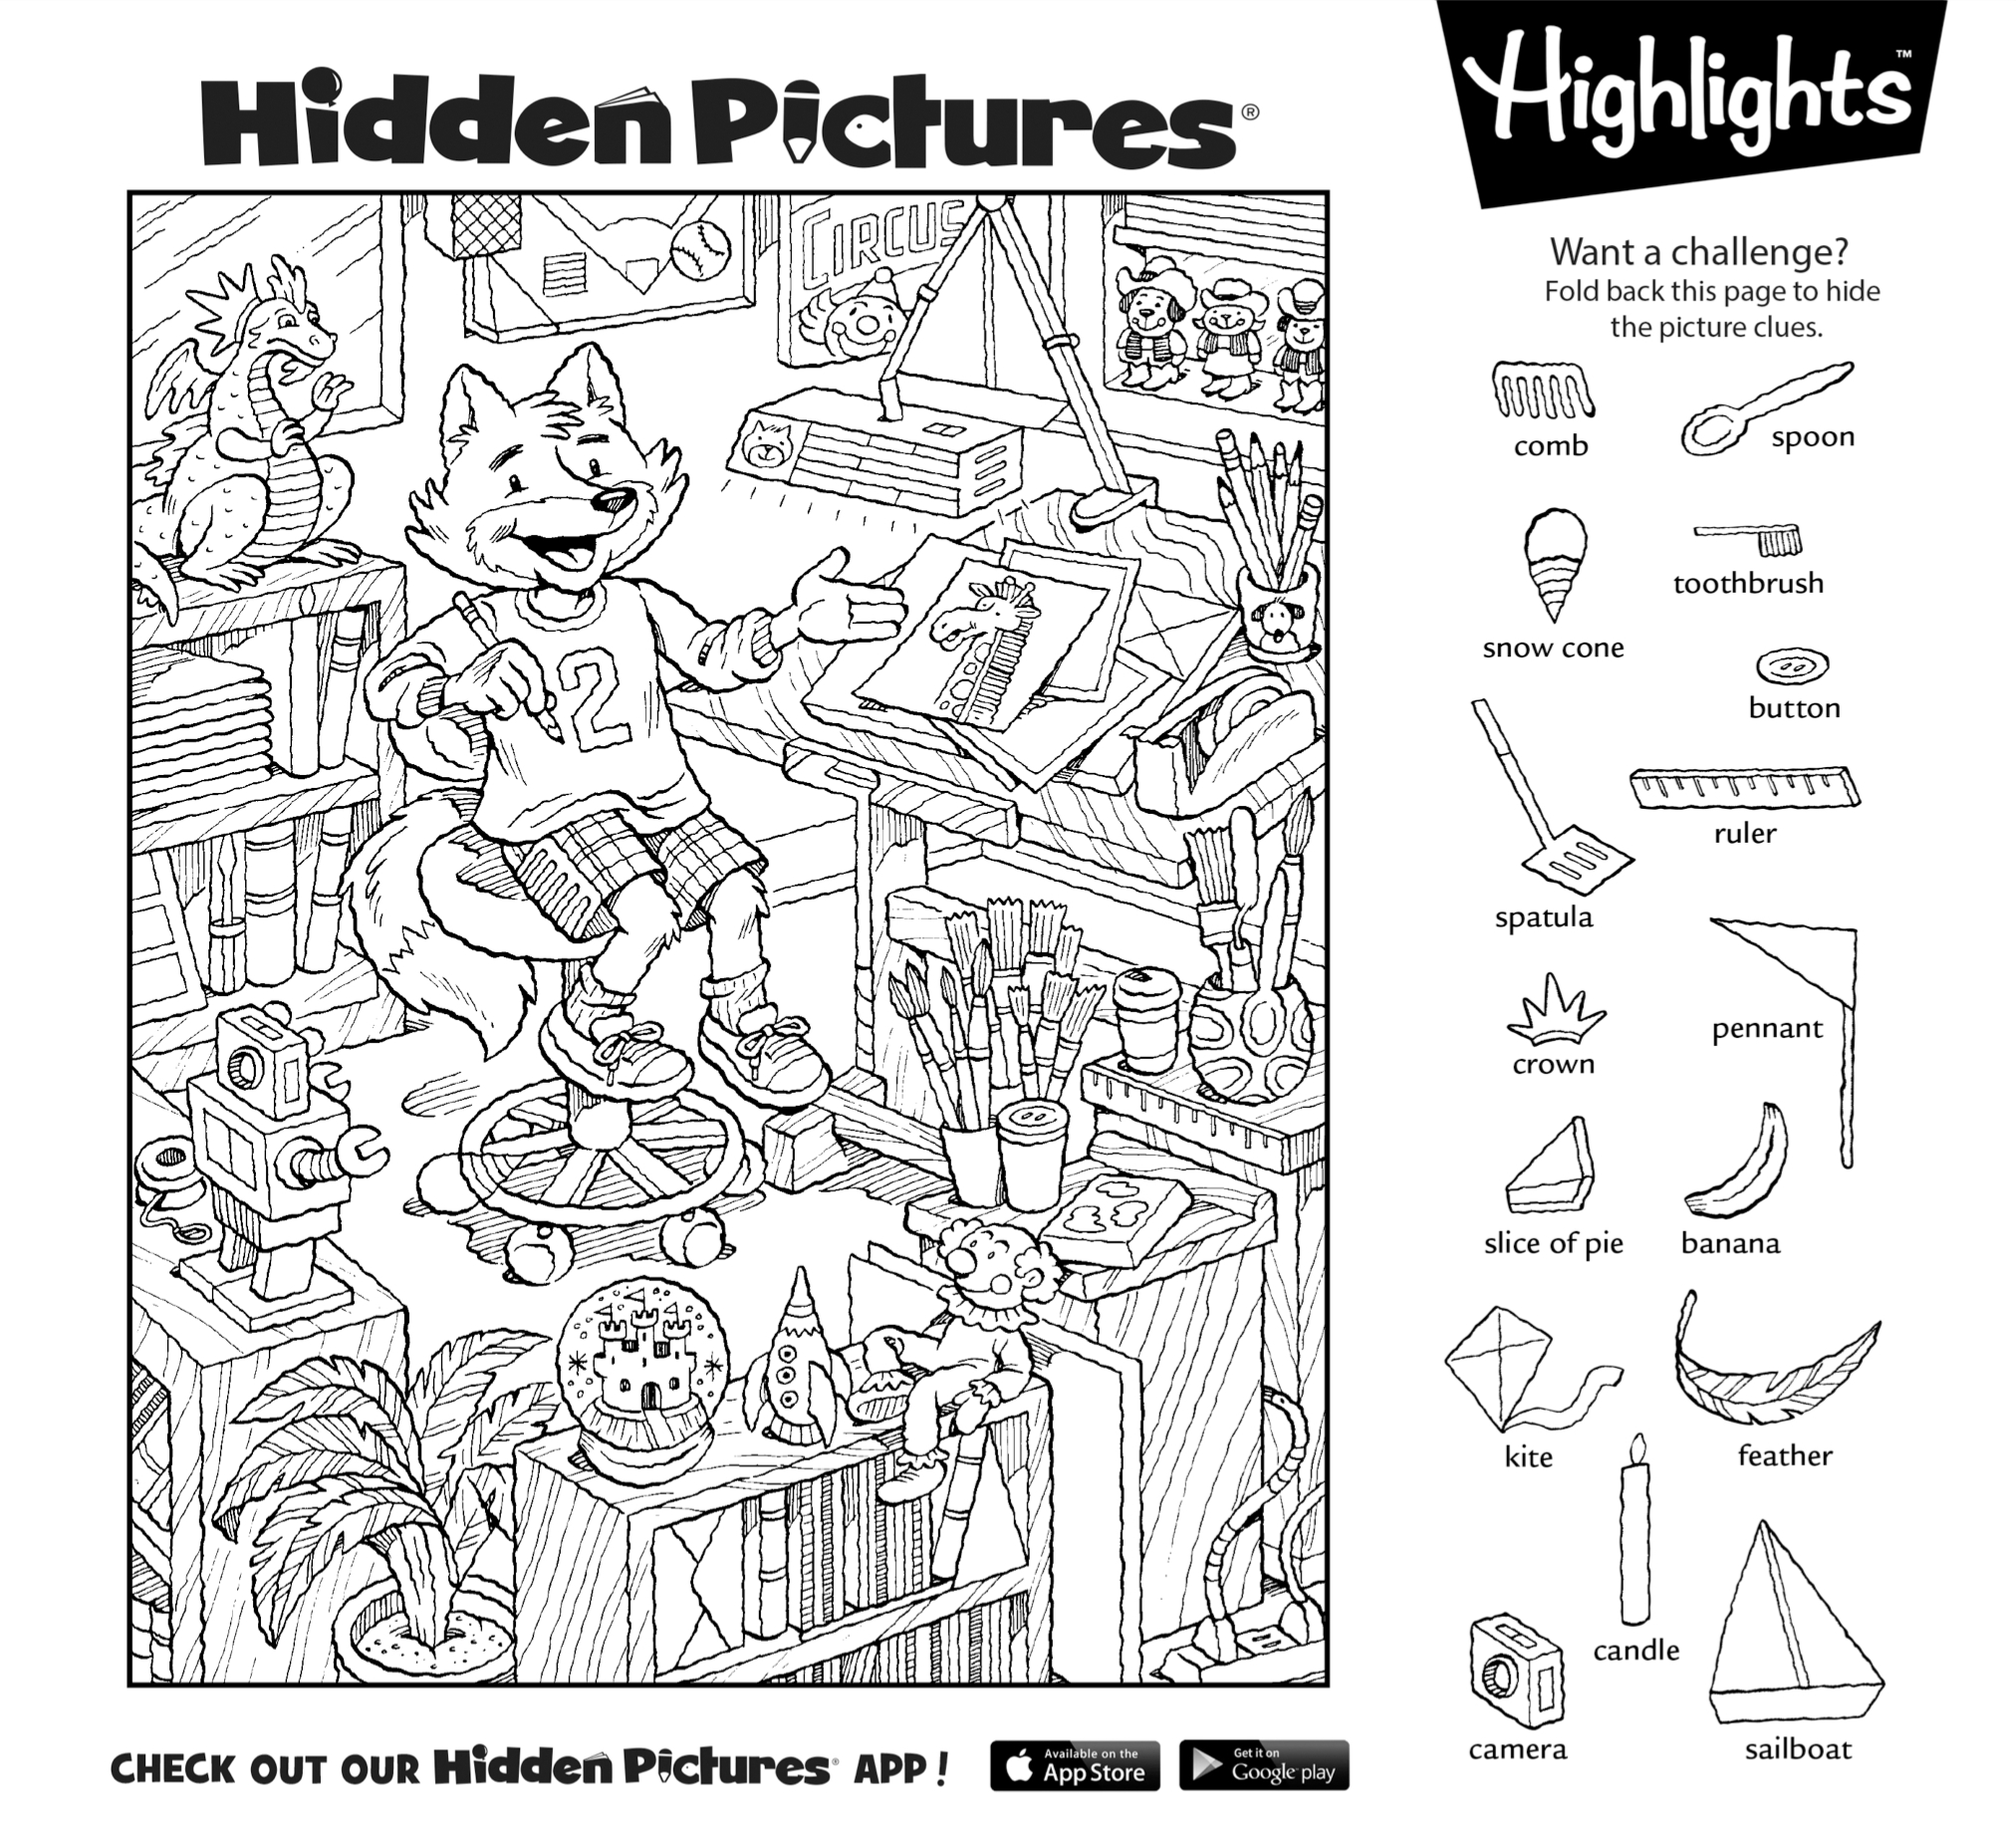 Download This Free Printable Hidden Pictures Puzzle To Share With - Free Printable Hidden Pictures